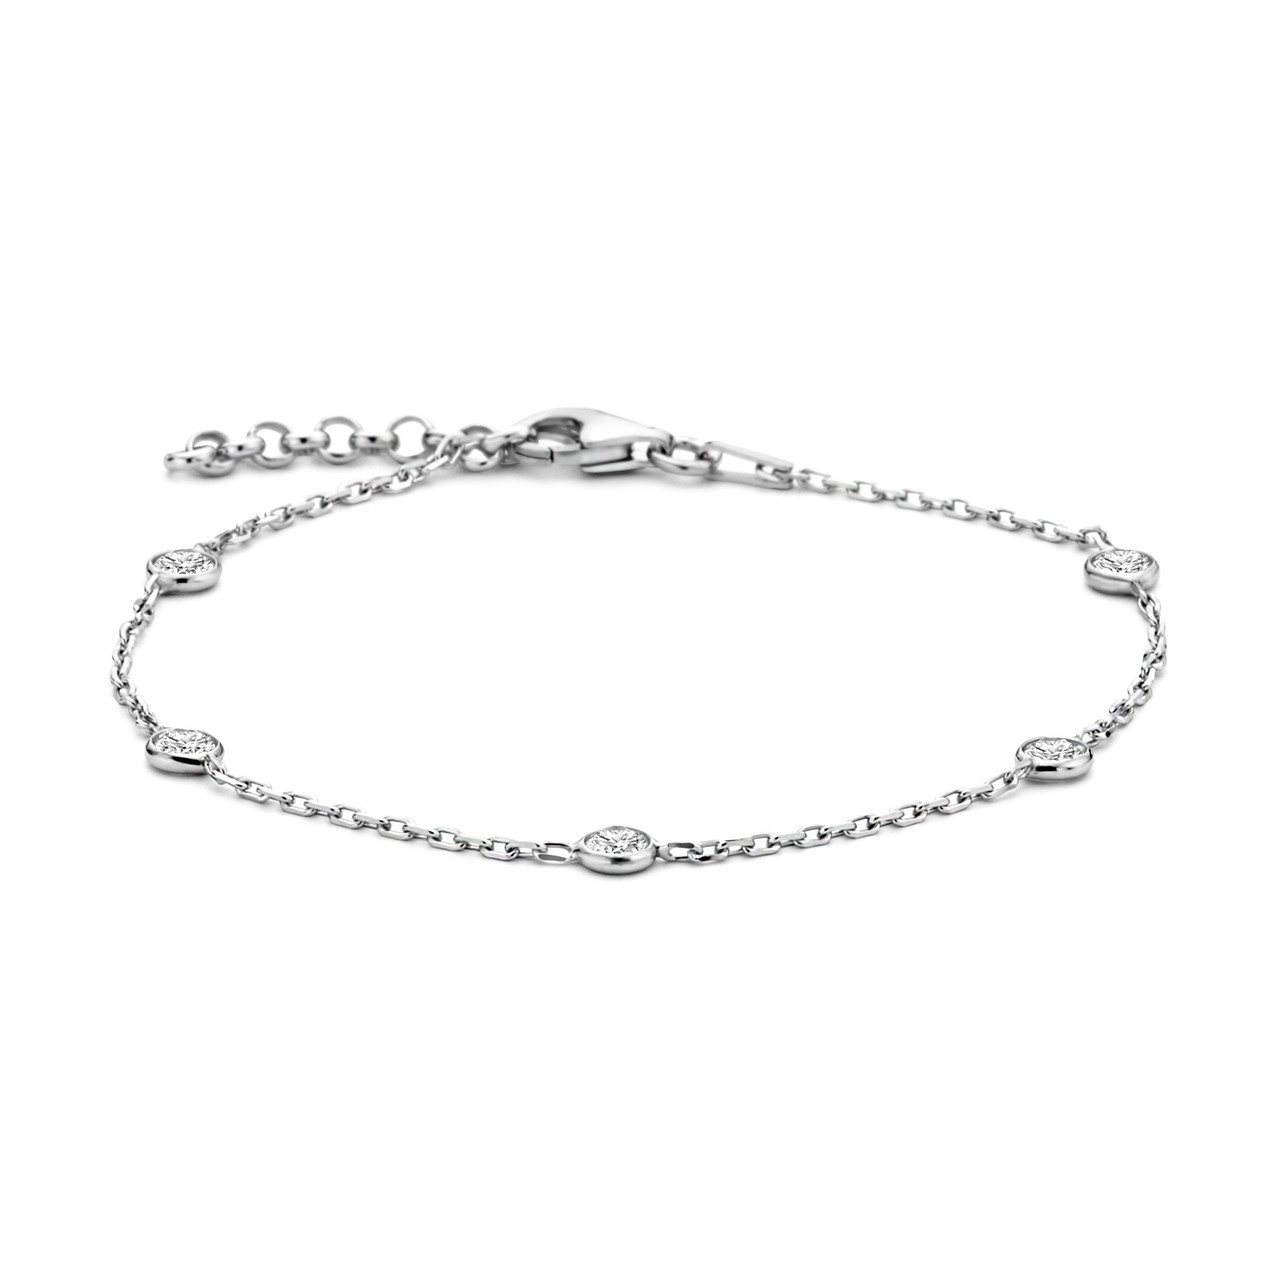 Rapid Delivery for Four Clover Bracelet - Mila Elodie 925 sterling silver bracelet with zirconia – XH&SILVER